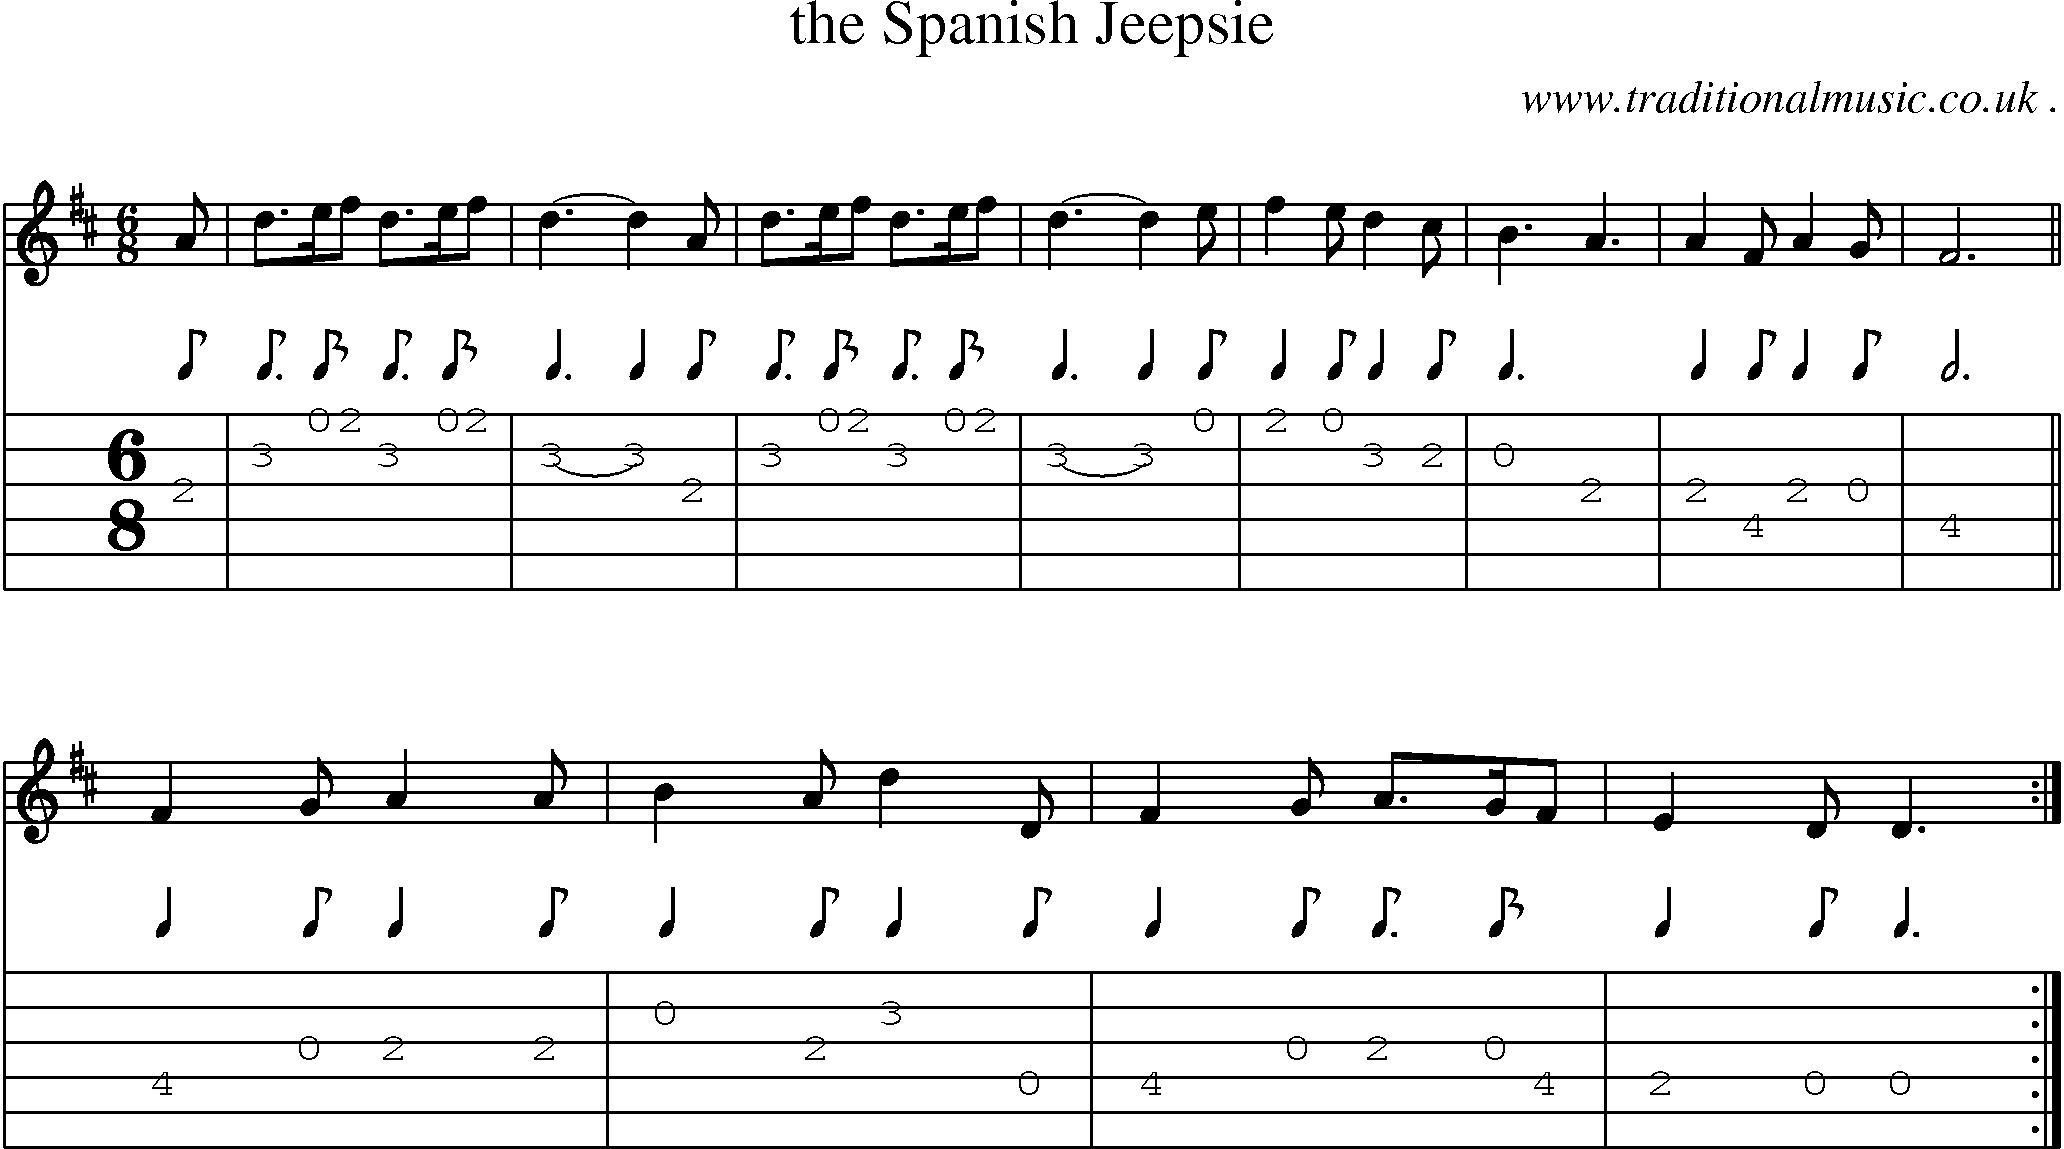 Sheet-music  score, Chords and Guitar Tabs for The Spanish Jeepsie